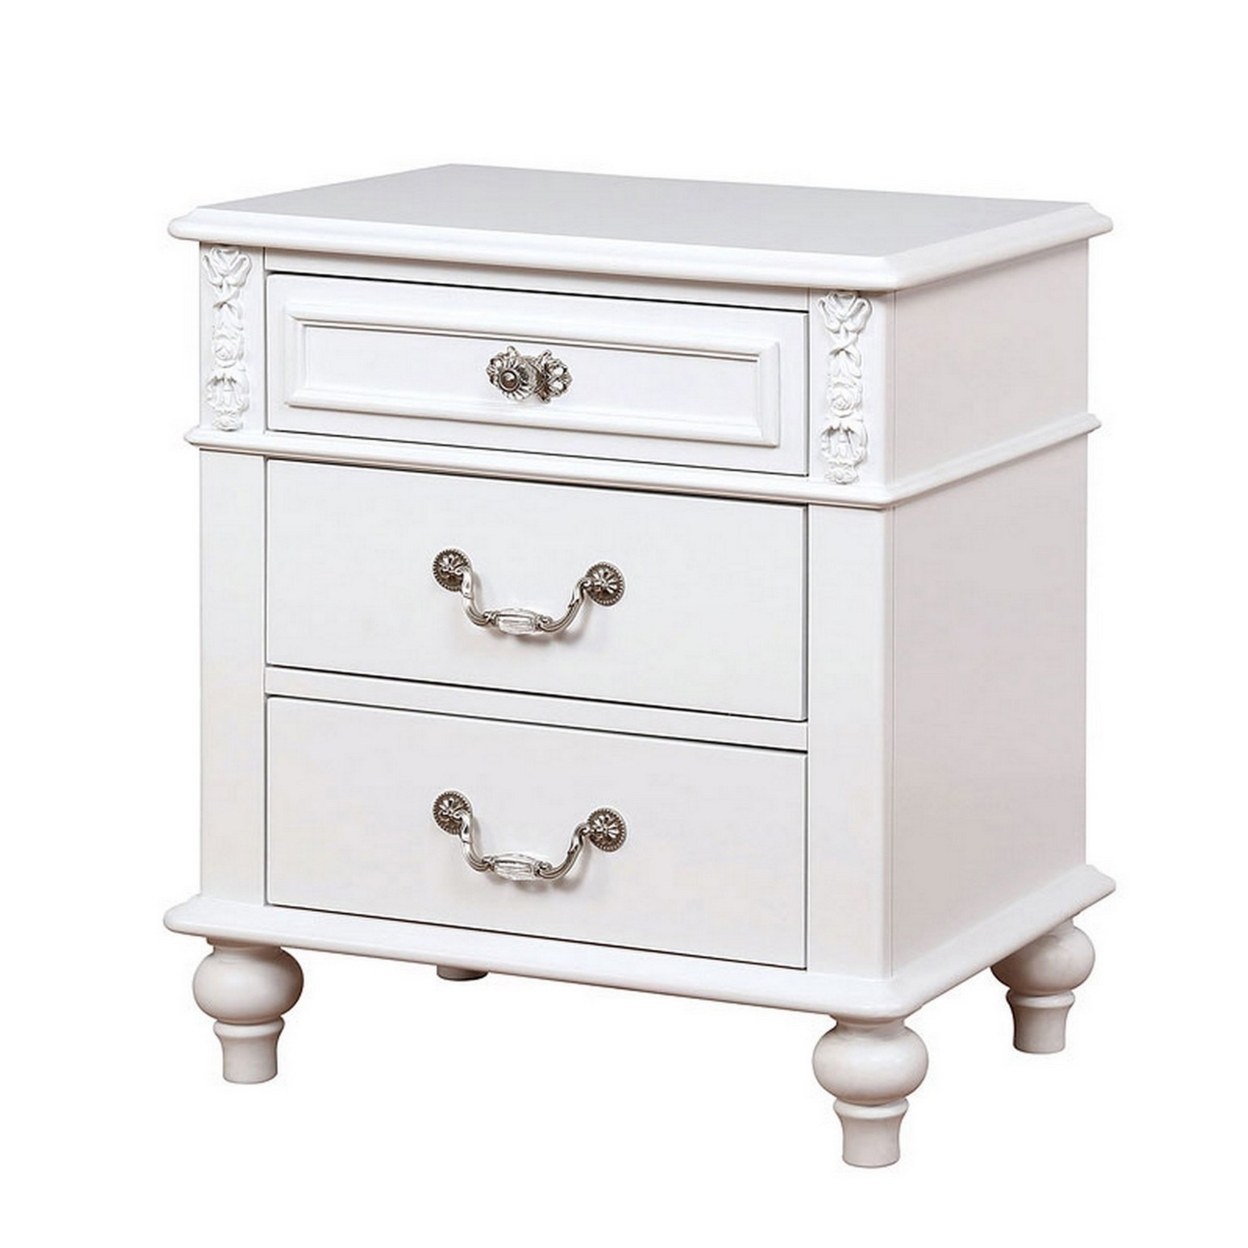 Nightstand With 3 Drawers And Built In USB Port, White- Saltoro Sherpi